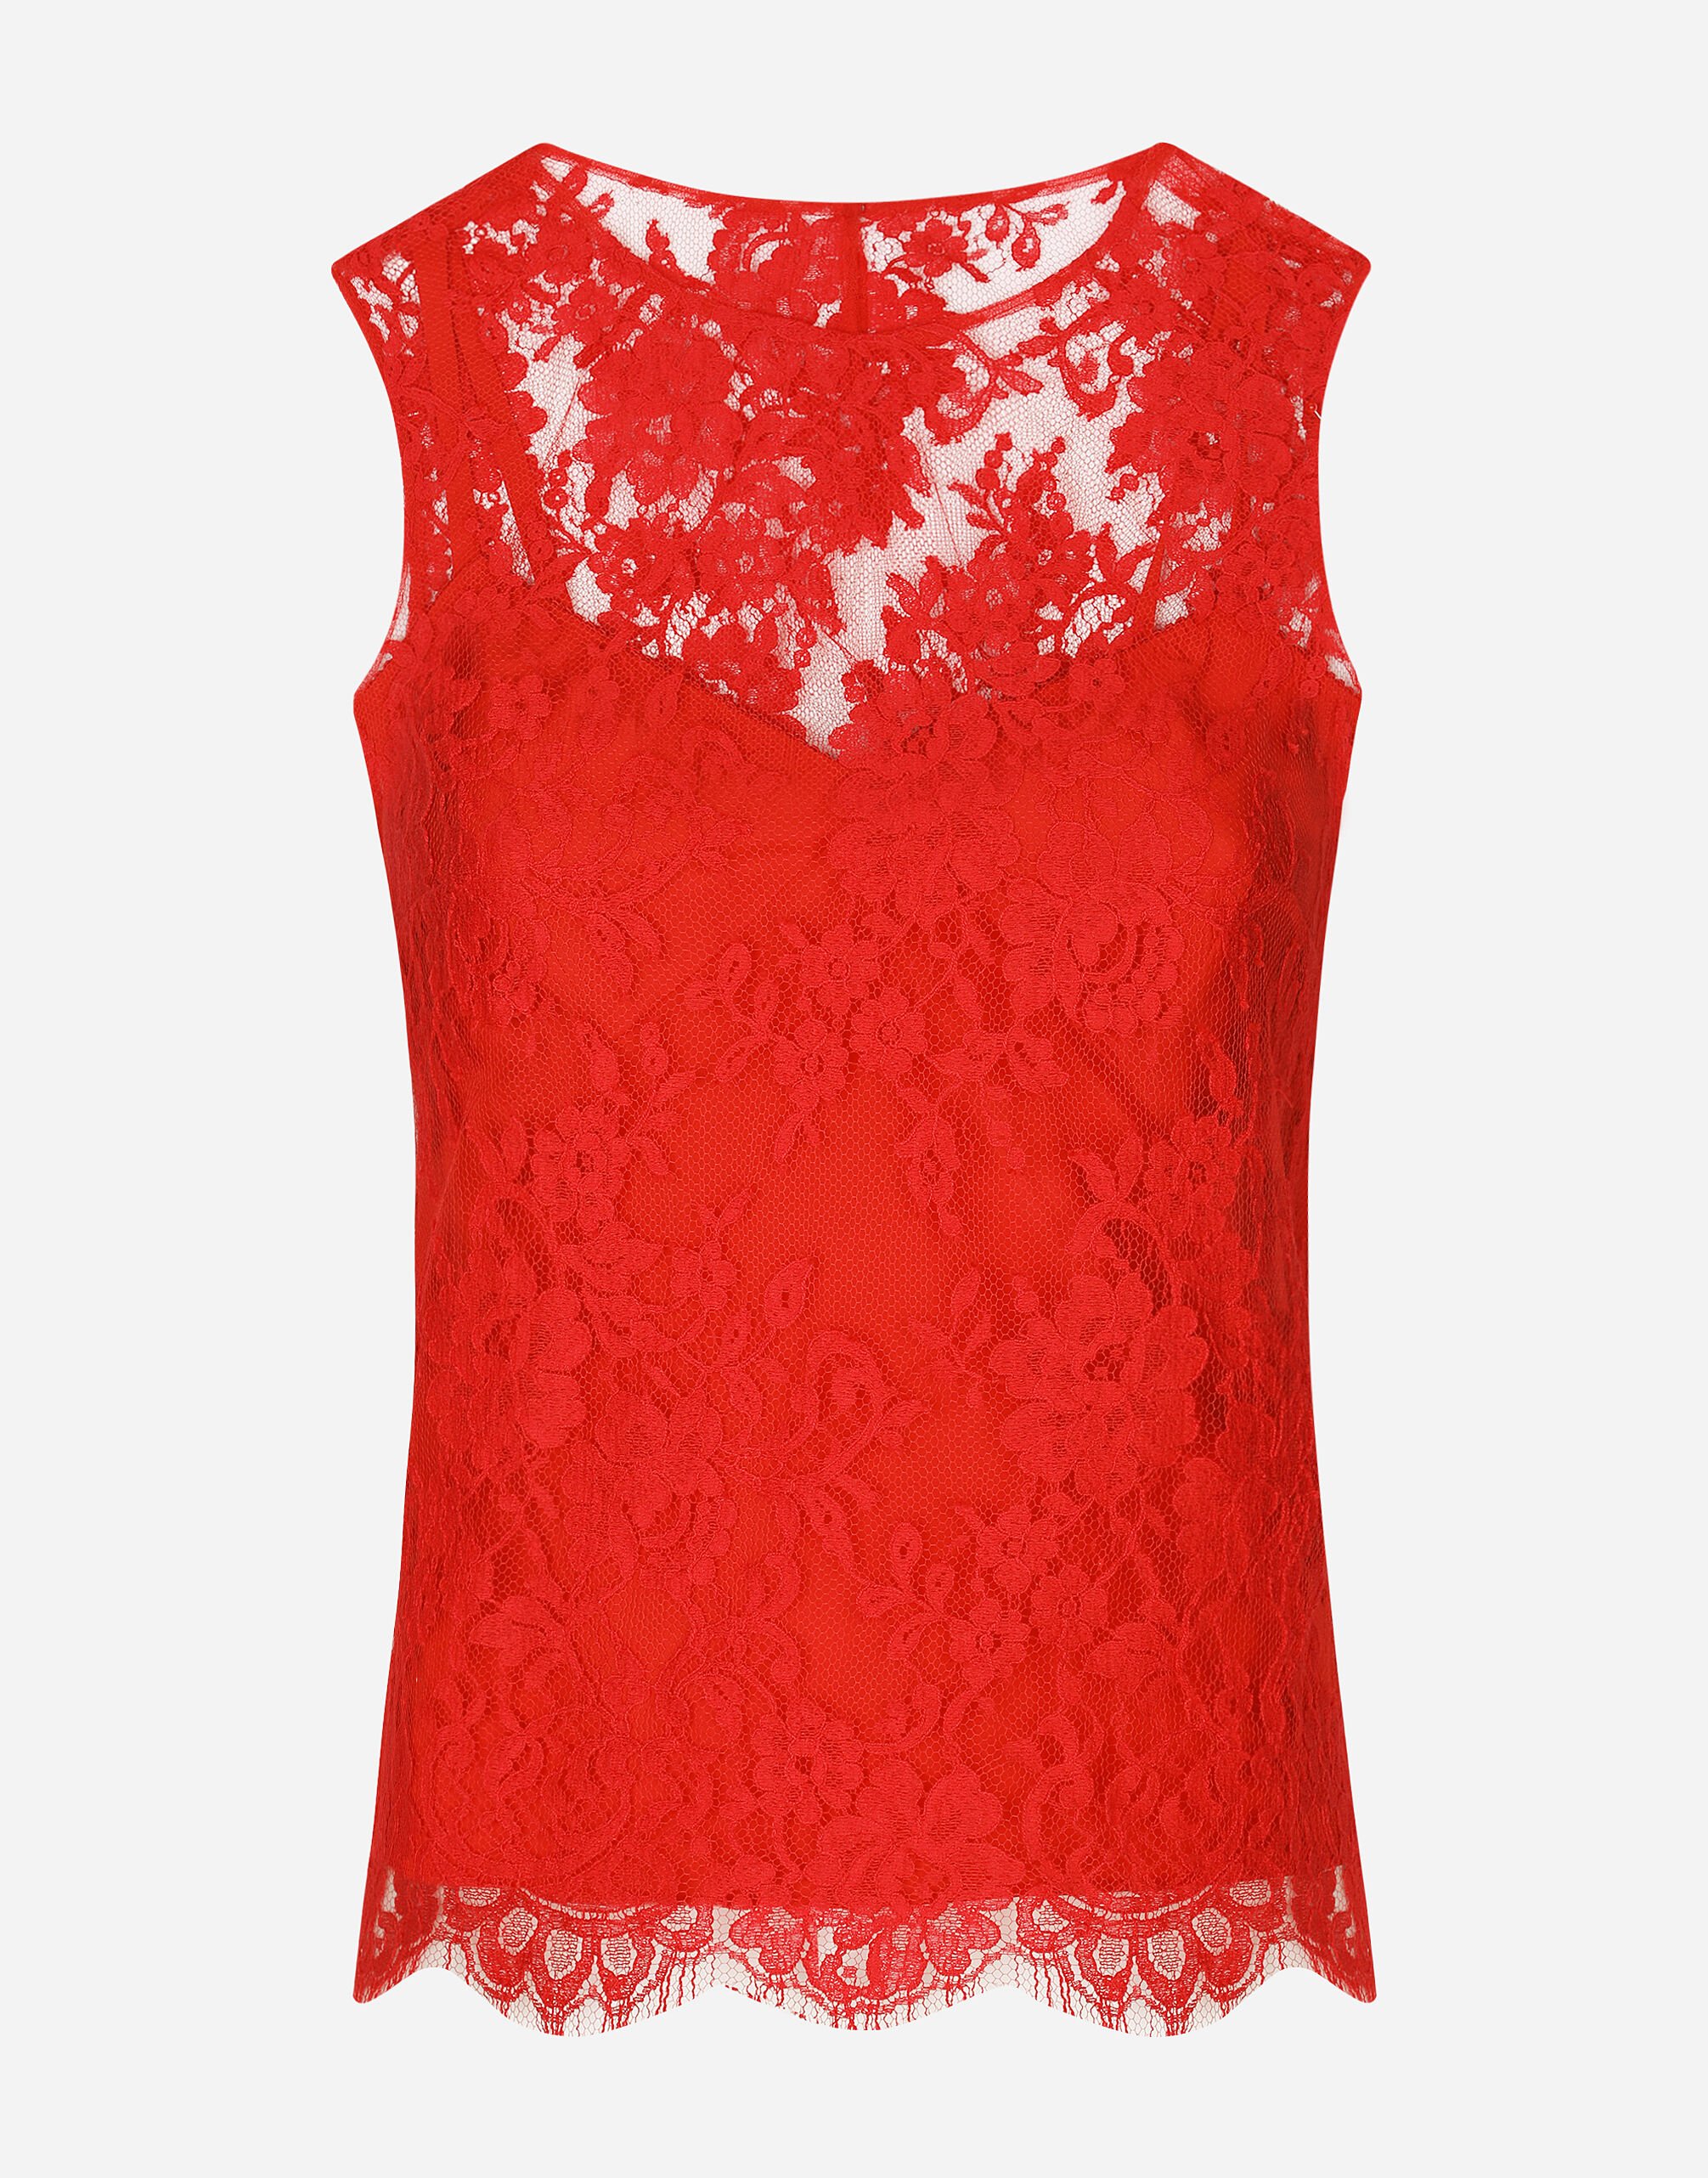 Dolce & Gabbana Floral Chantilly lace top Red F6AWOTFURAD